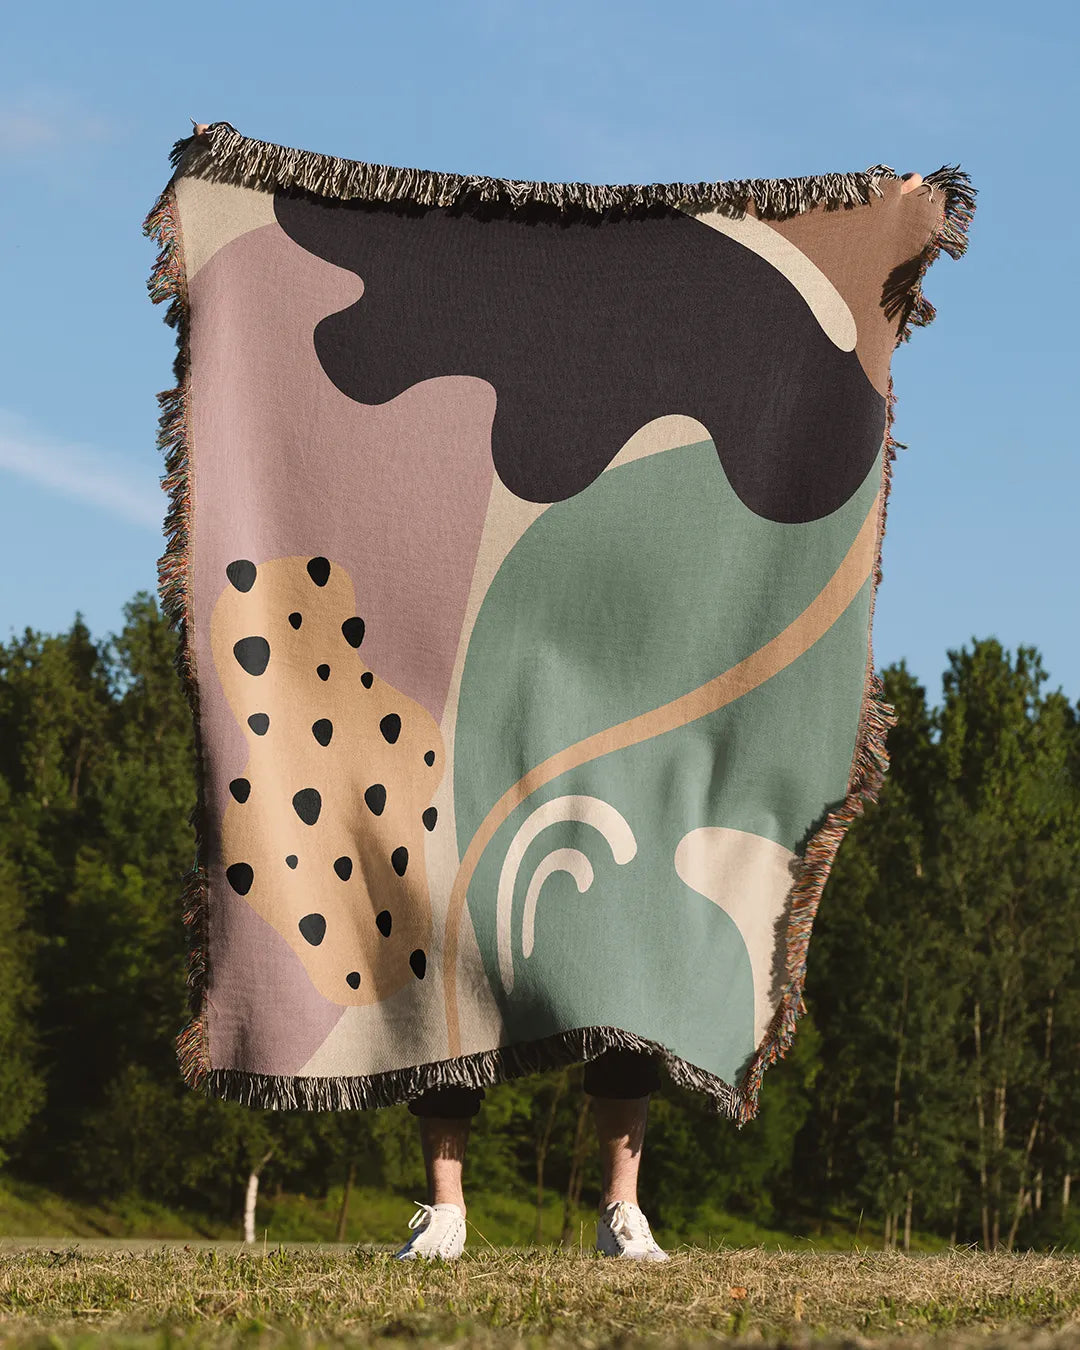 Retro-Futuristic Cotton Woven Throw Blanket in dusty pink, sage green, and cream with fringe edges.